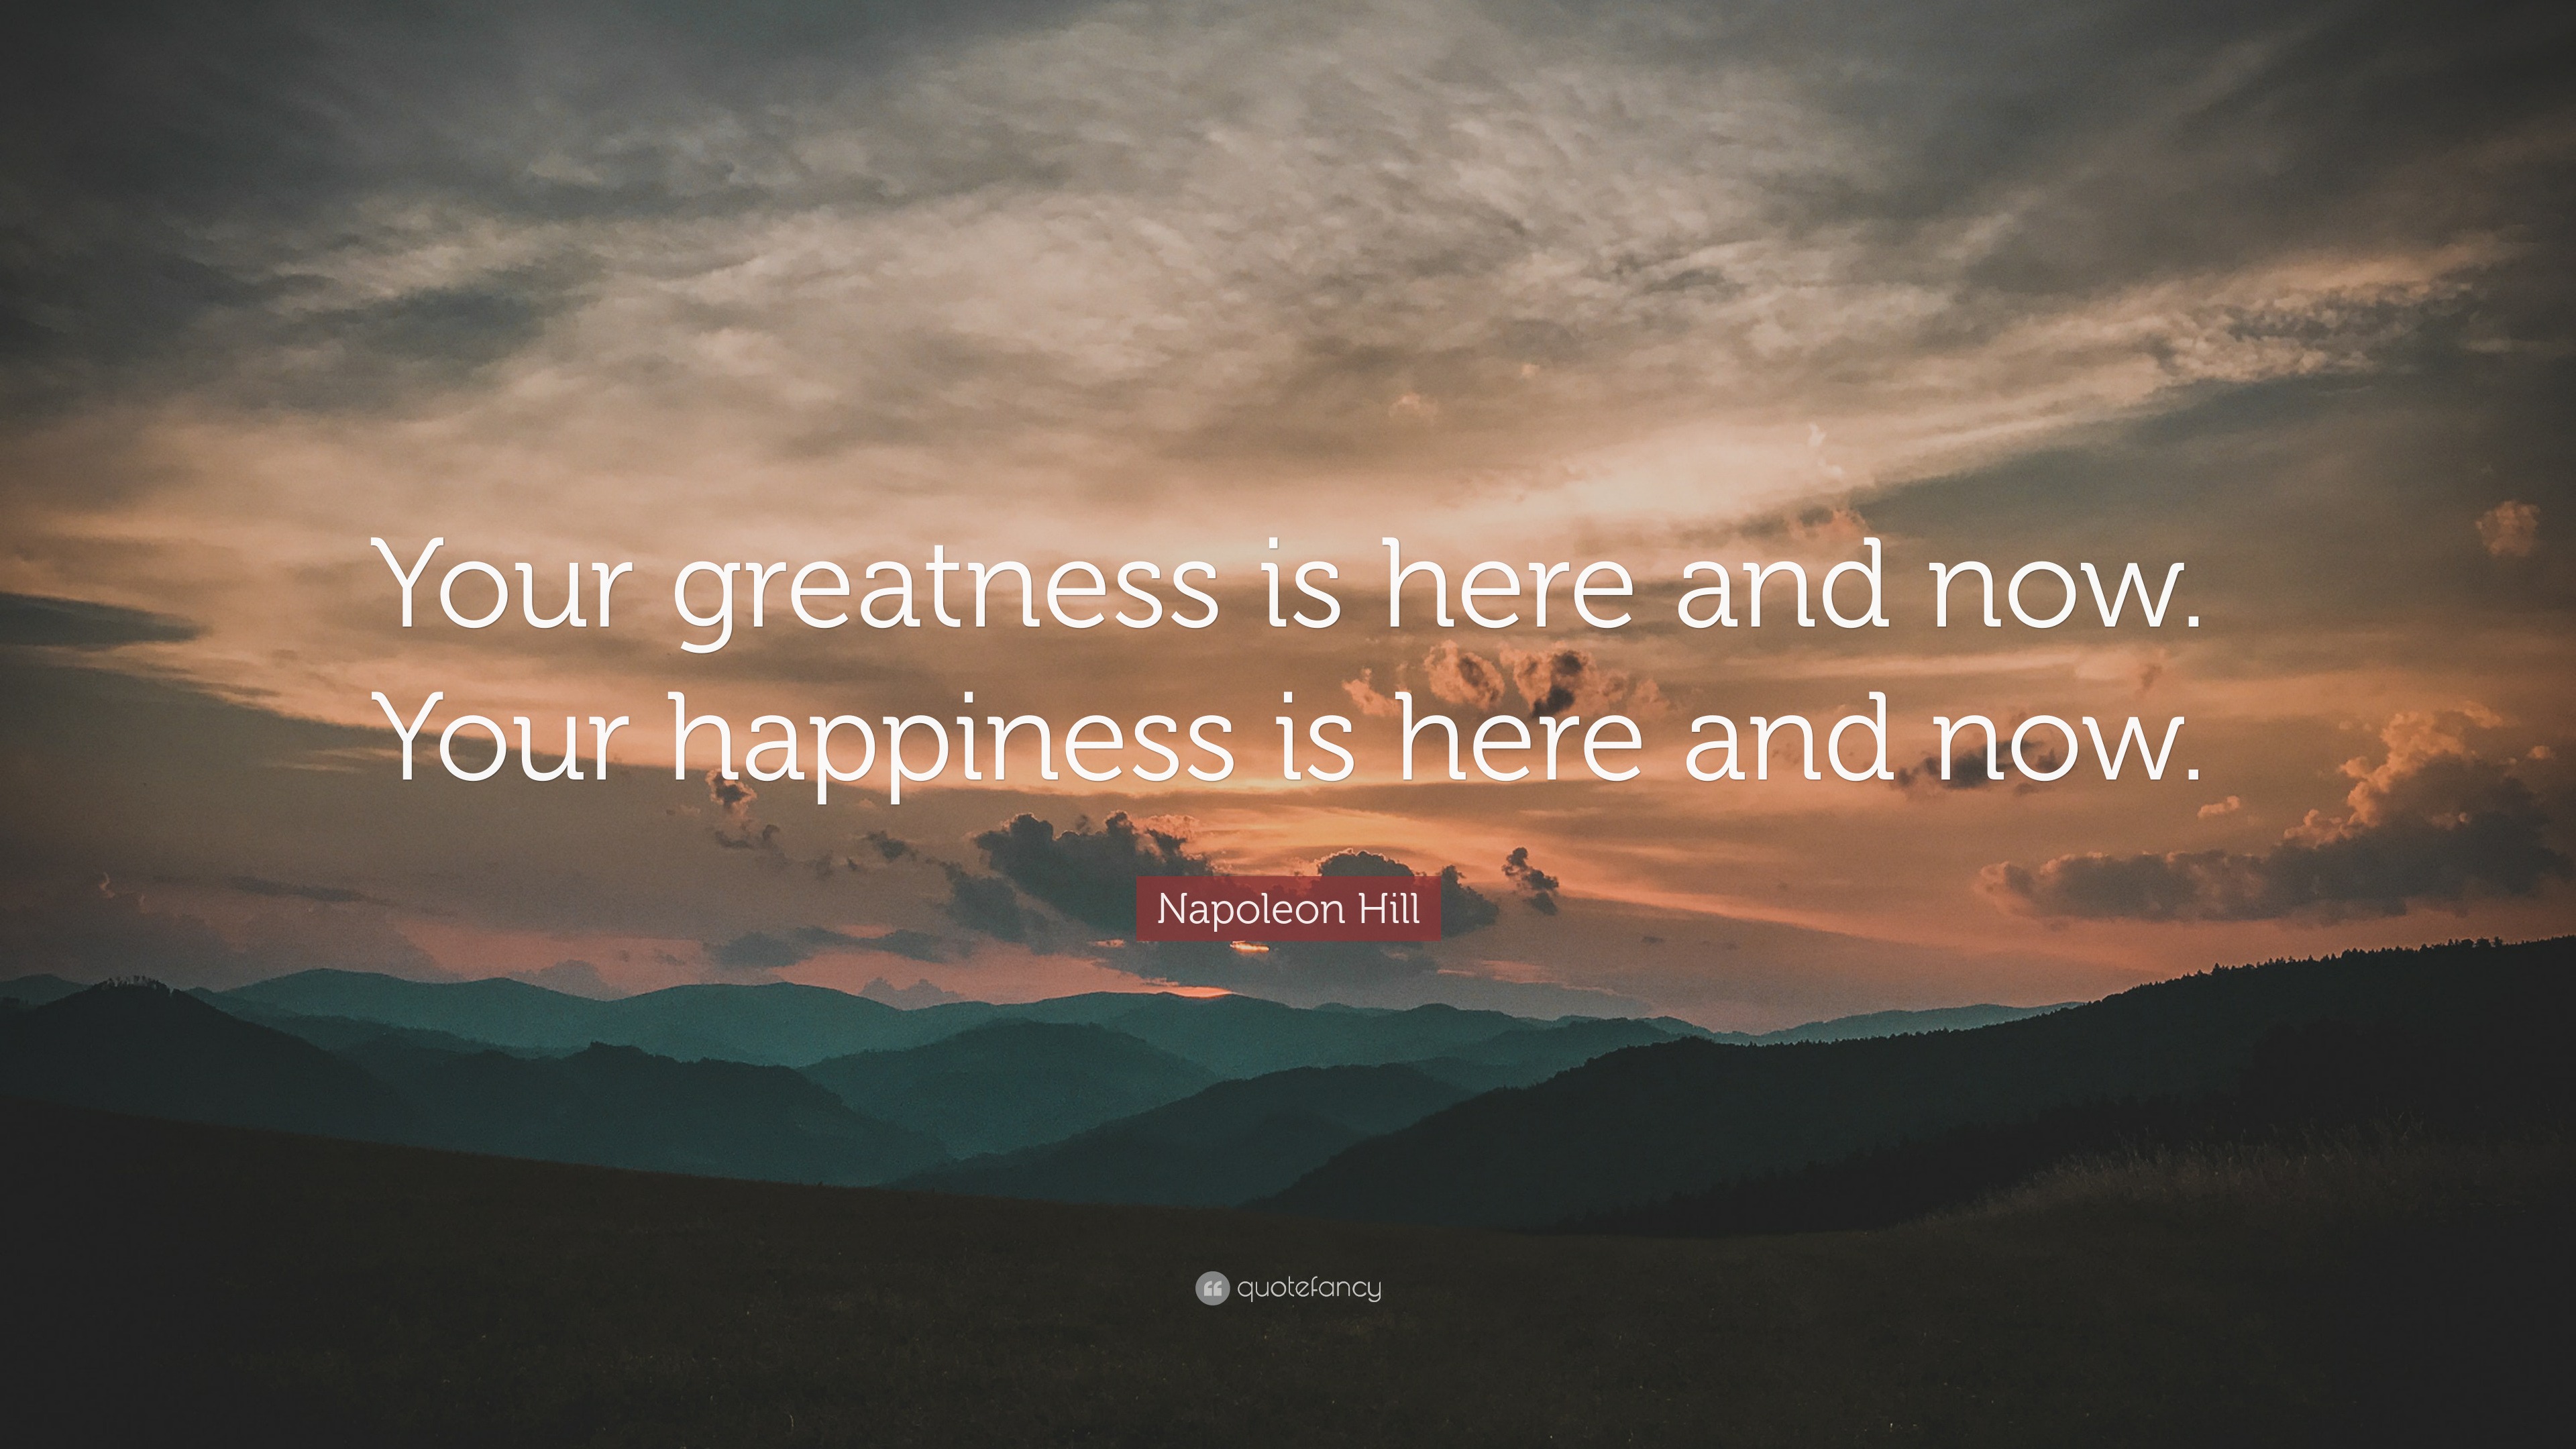 napoleon hill quotes life napoleon hill quote u201cyour greatness is here and now your